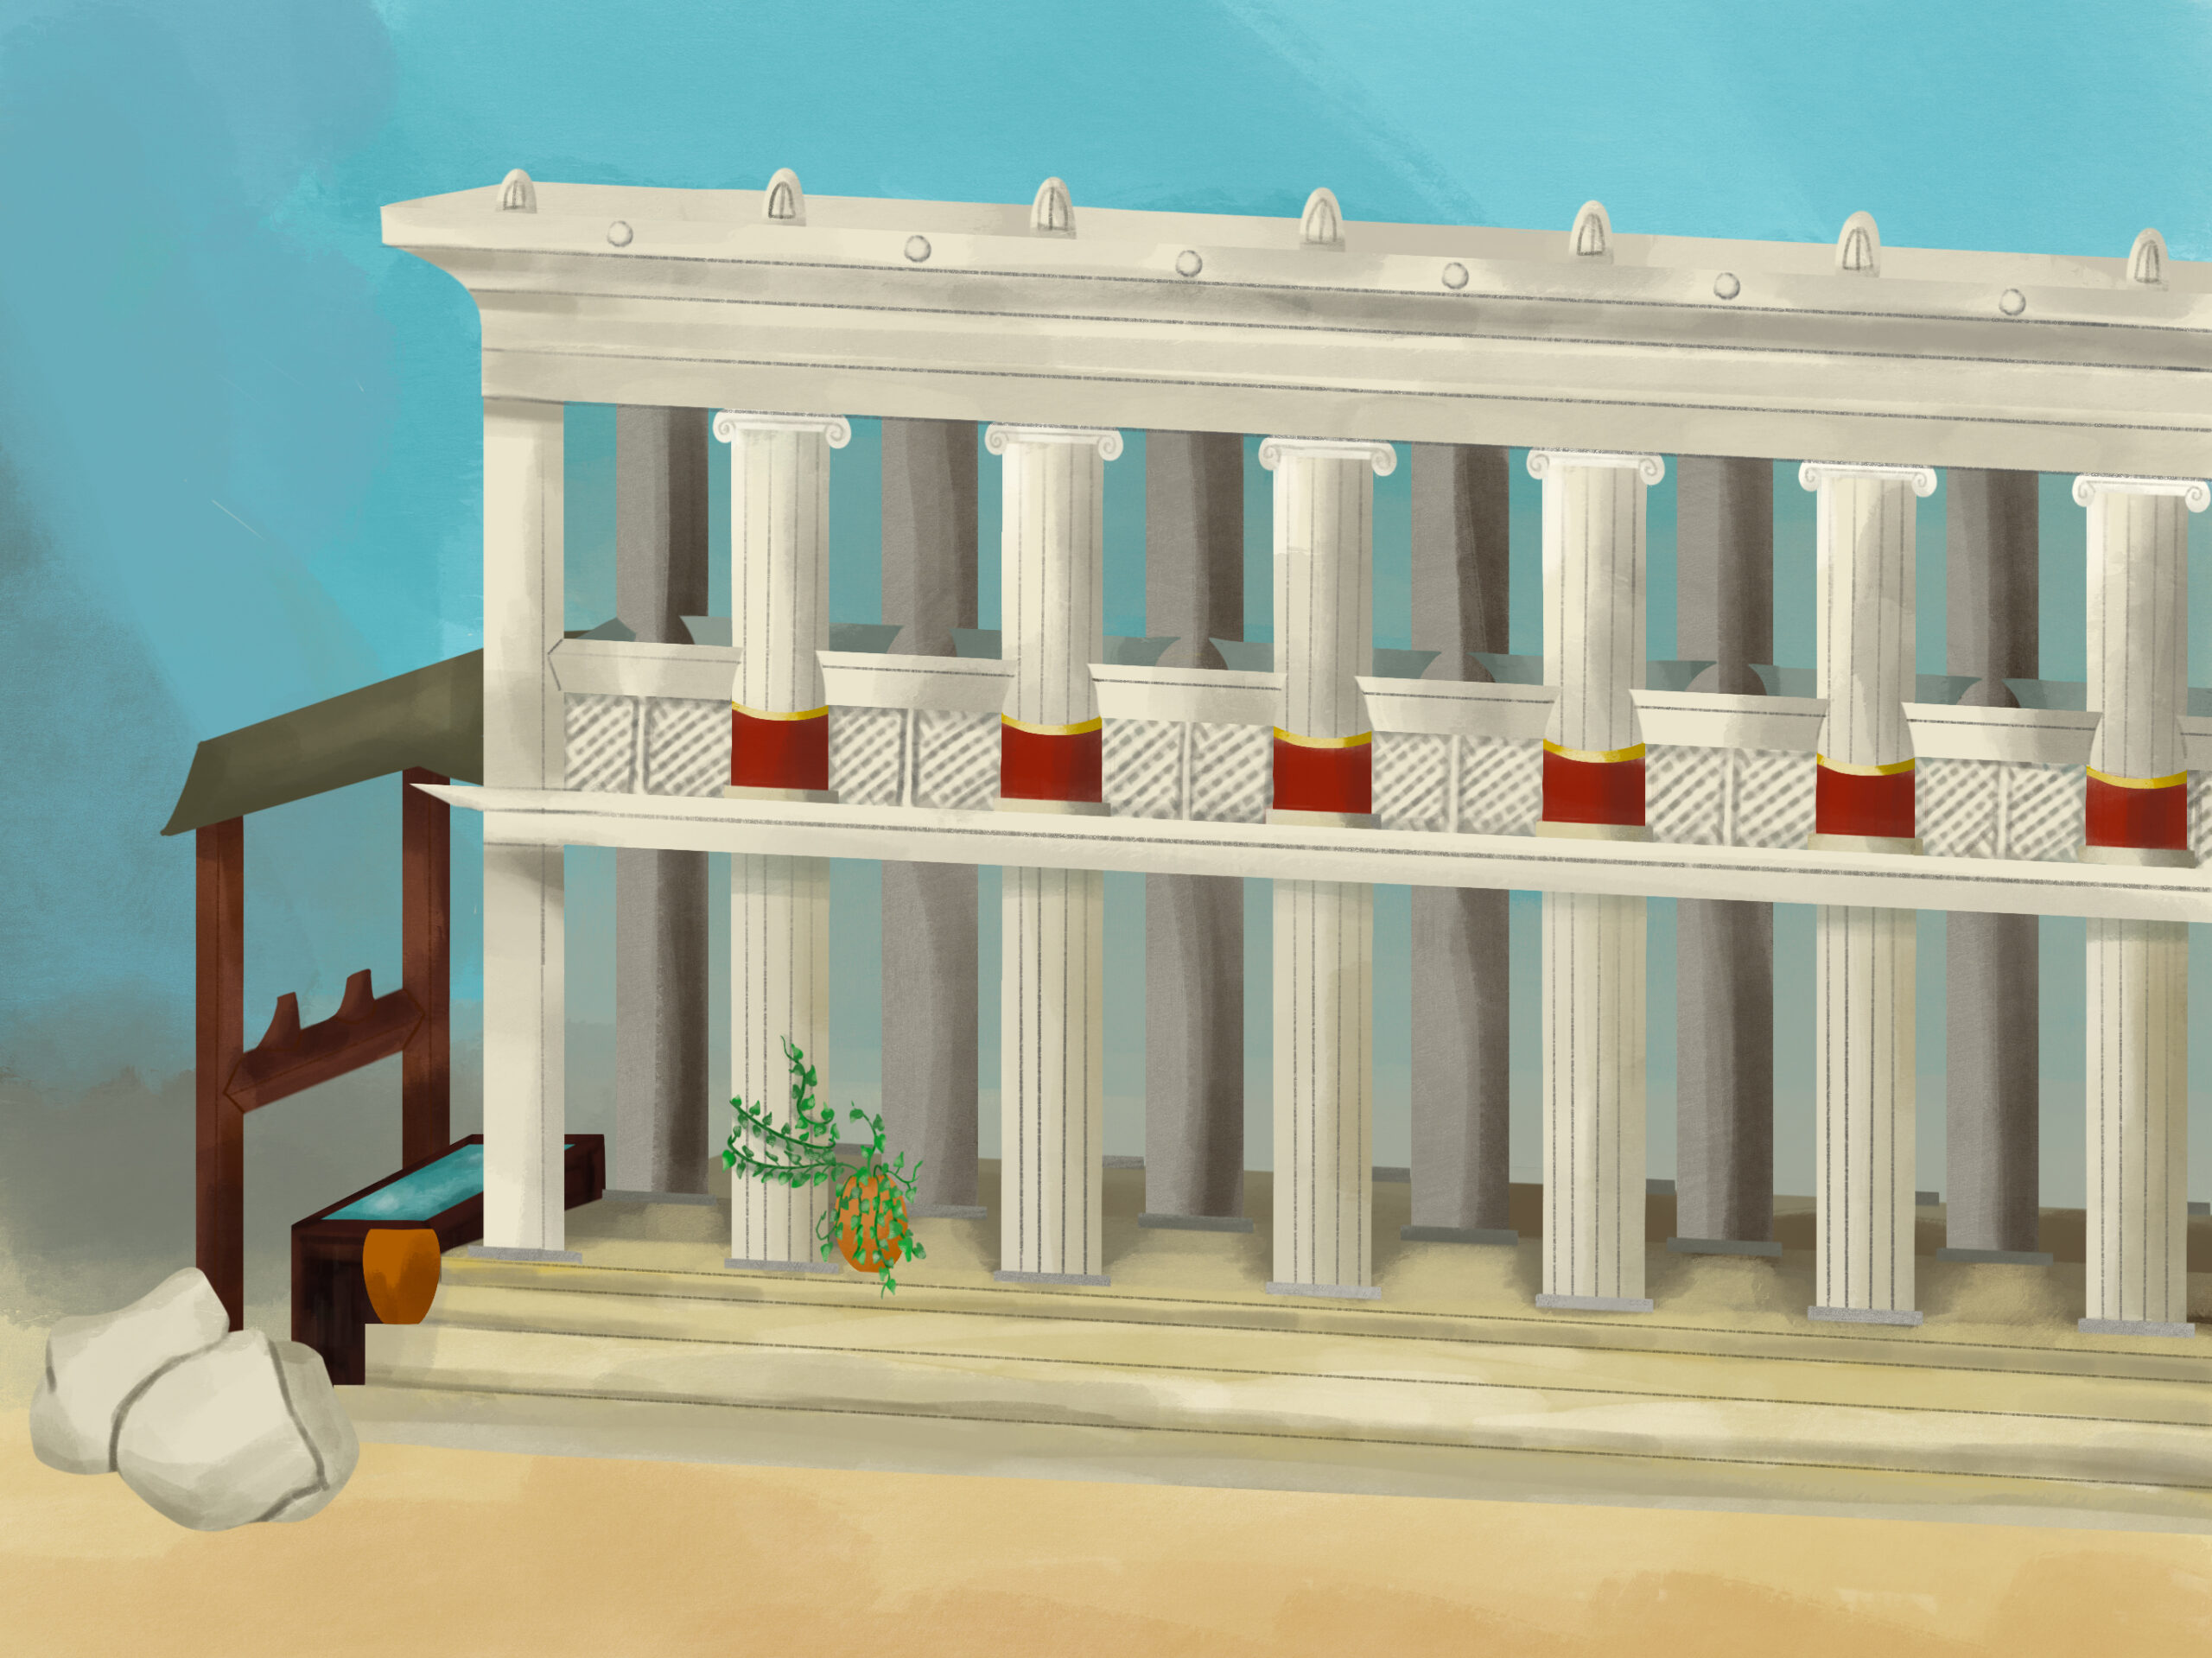 Stoa Background, featuring an ancient greek columned 'Stoa' in a sunny vista. The art style is lineless, with a natural palette.